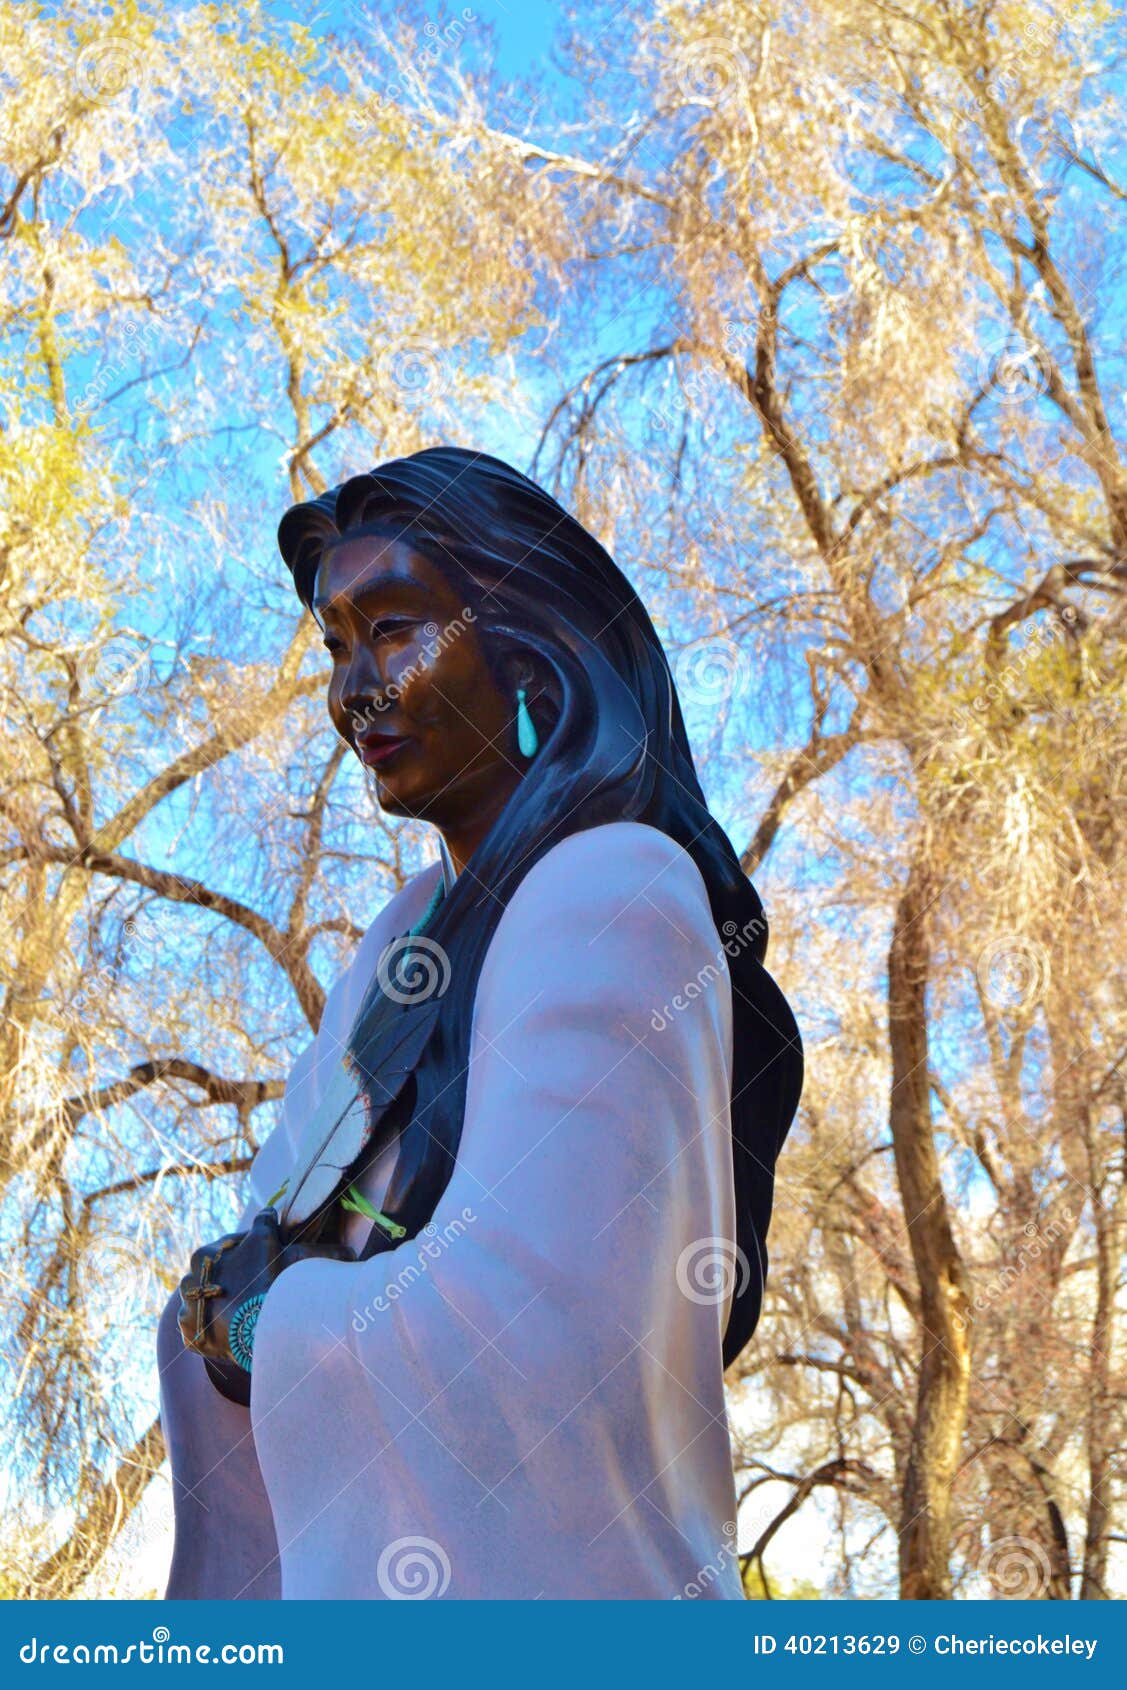 our lady of peace wooden statue, santa fe